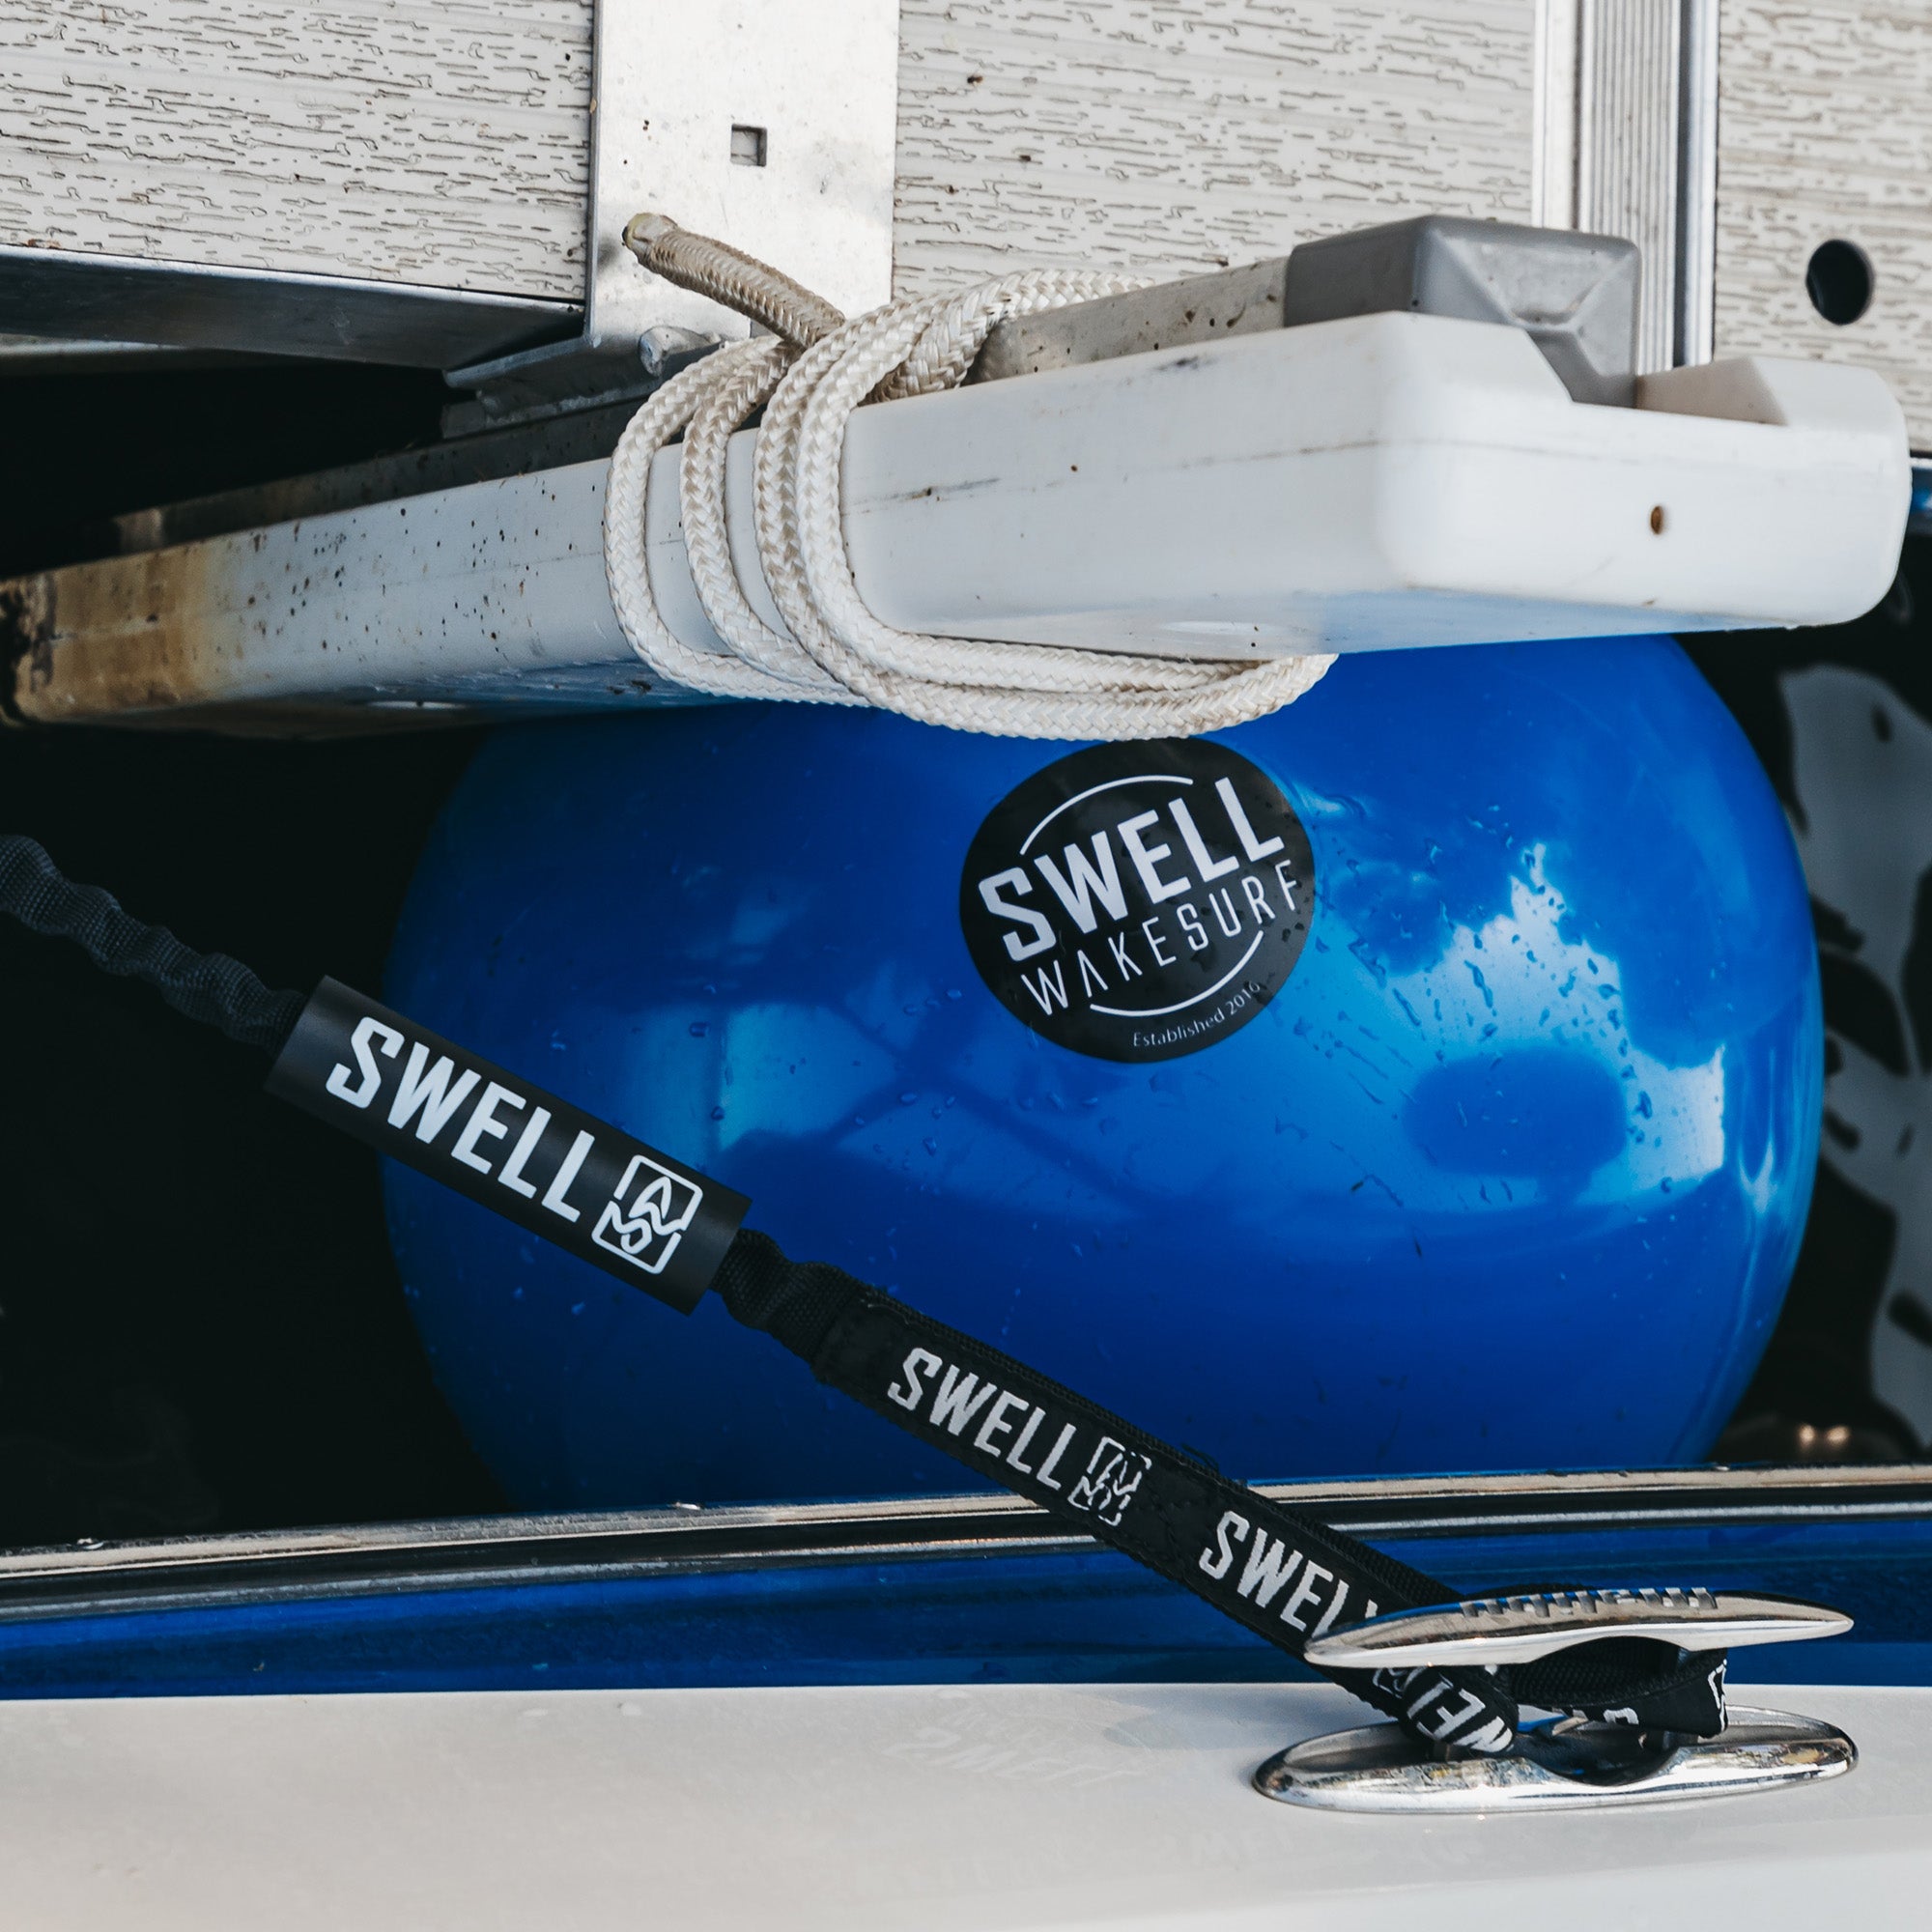 SWELL Wakesurf - Original Buoy Ball Inflatable Bumper - Great For Tie-ups